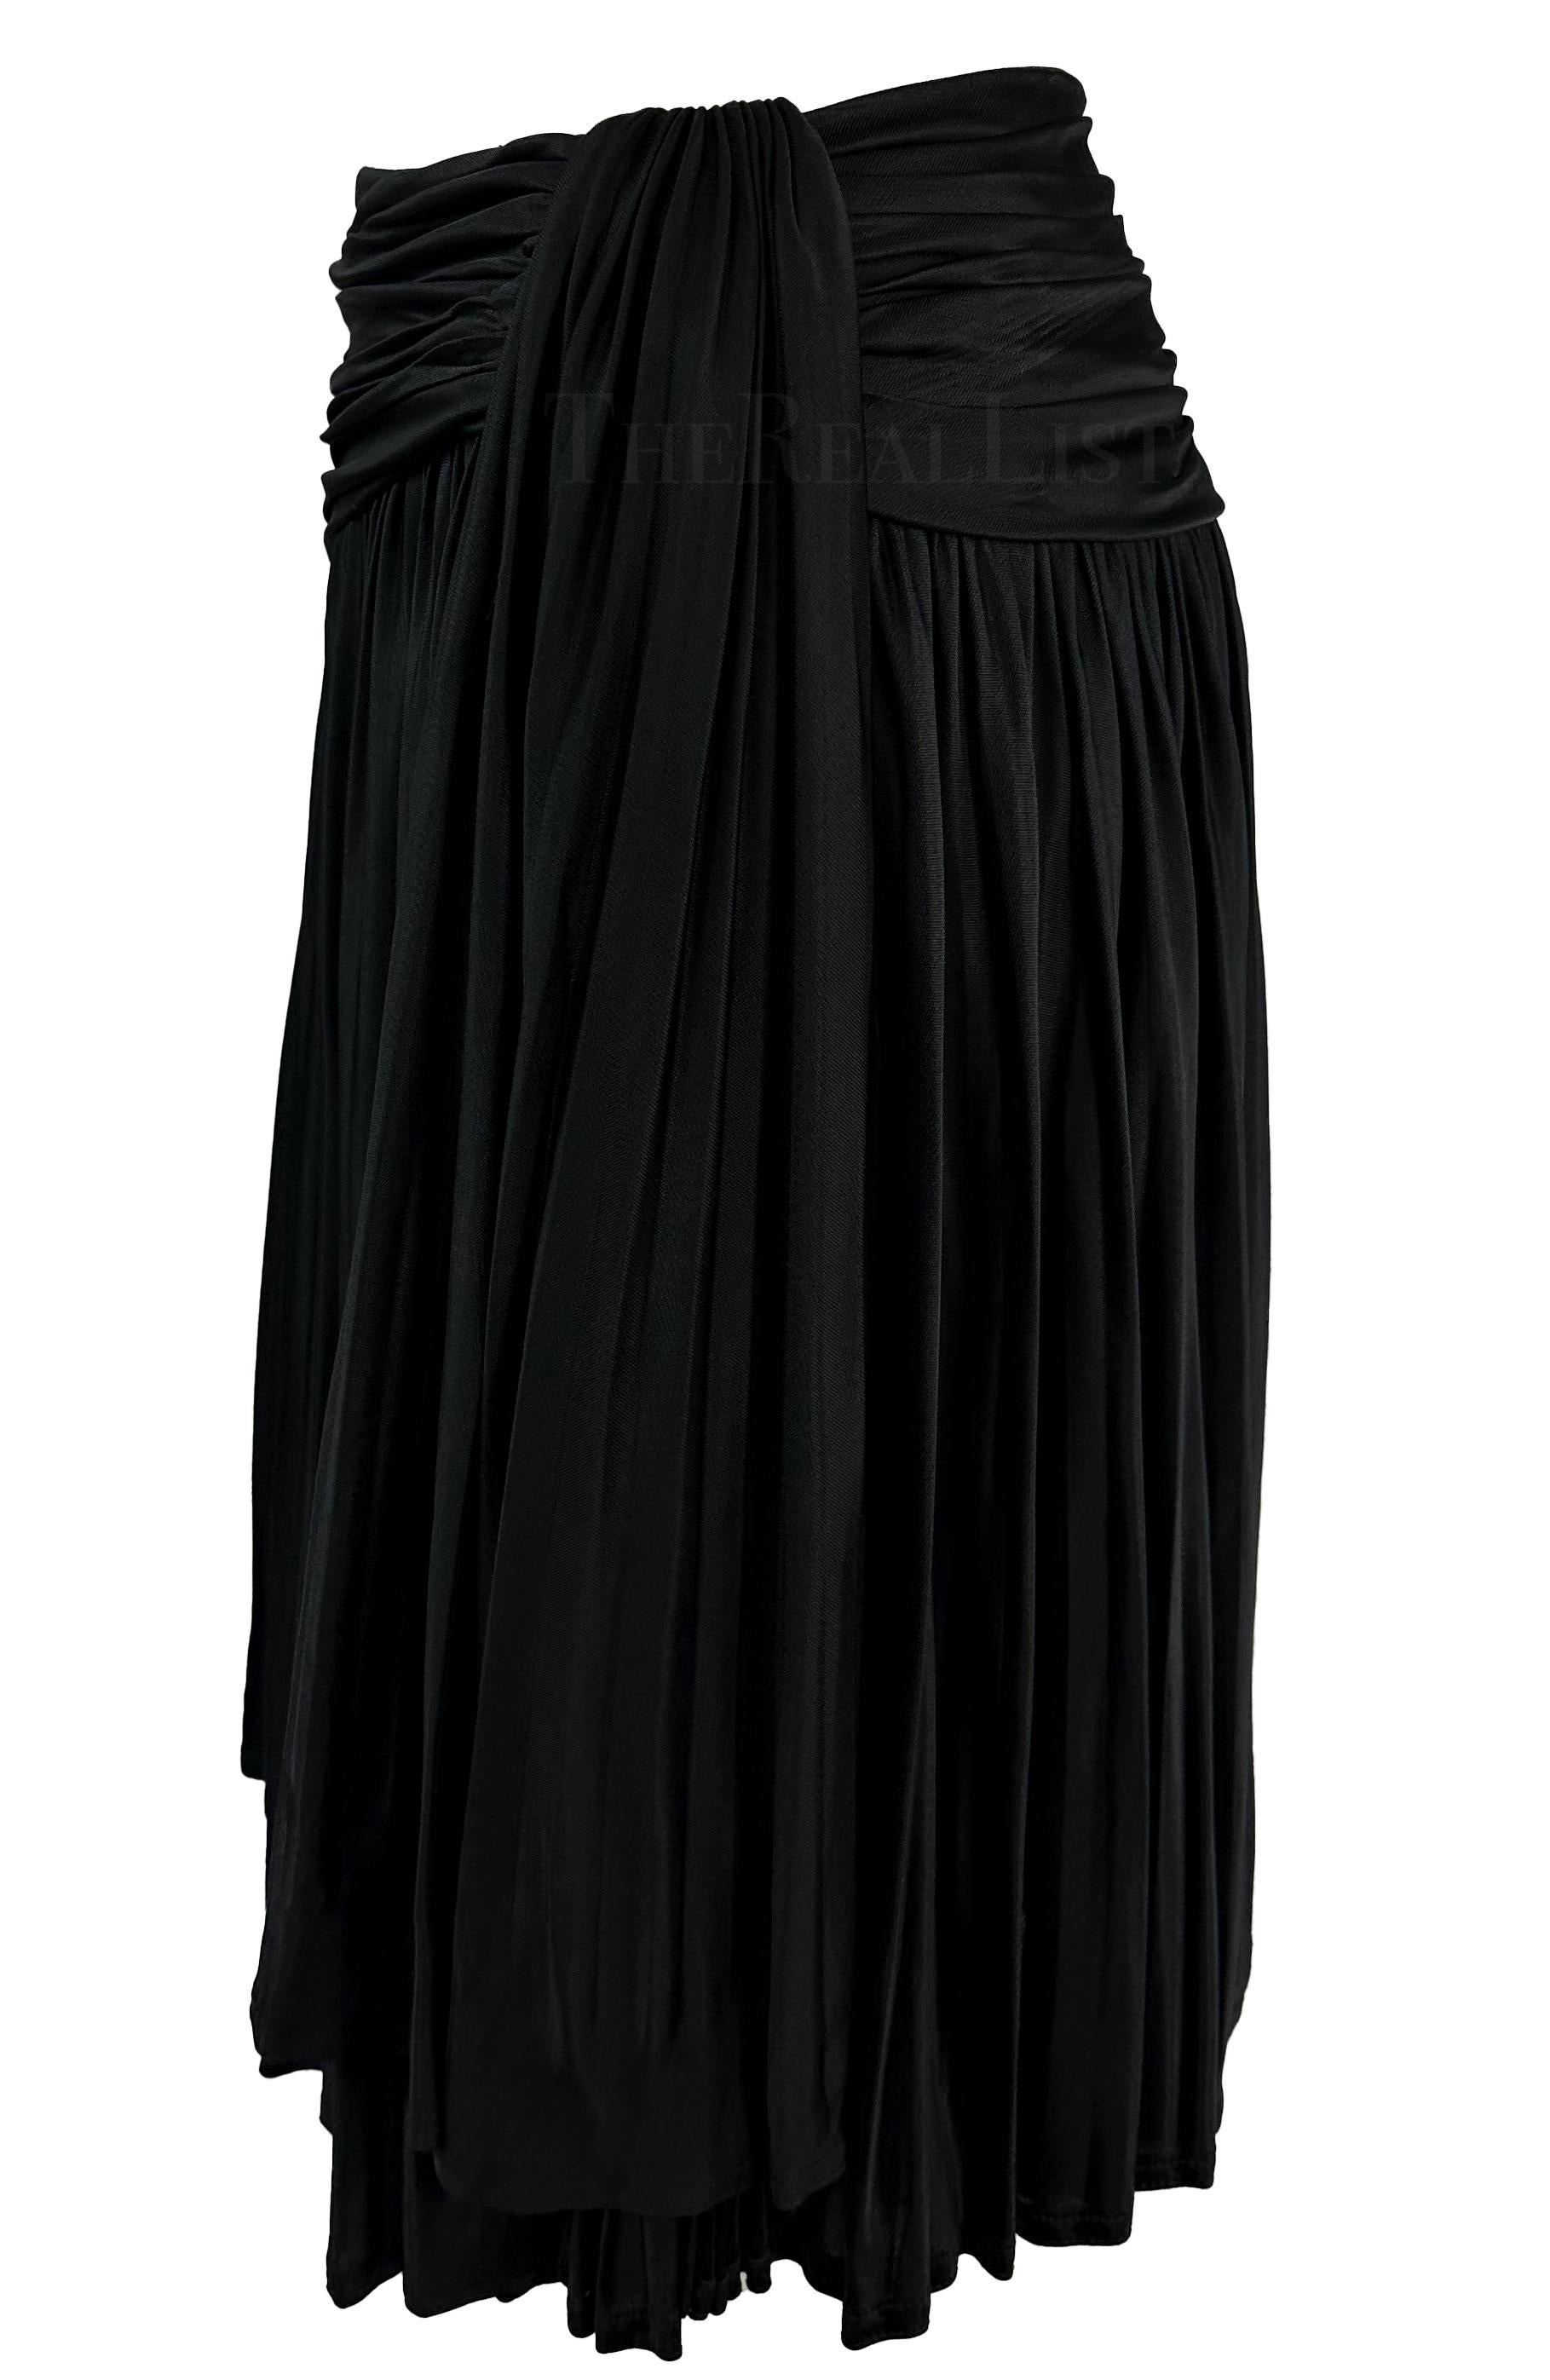 S/S 1995 Gianni Versace Black Pleated Faux Wrap Flare Skirt In Excellent Condition For Sale In West Hollywood, CA